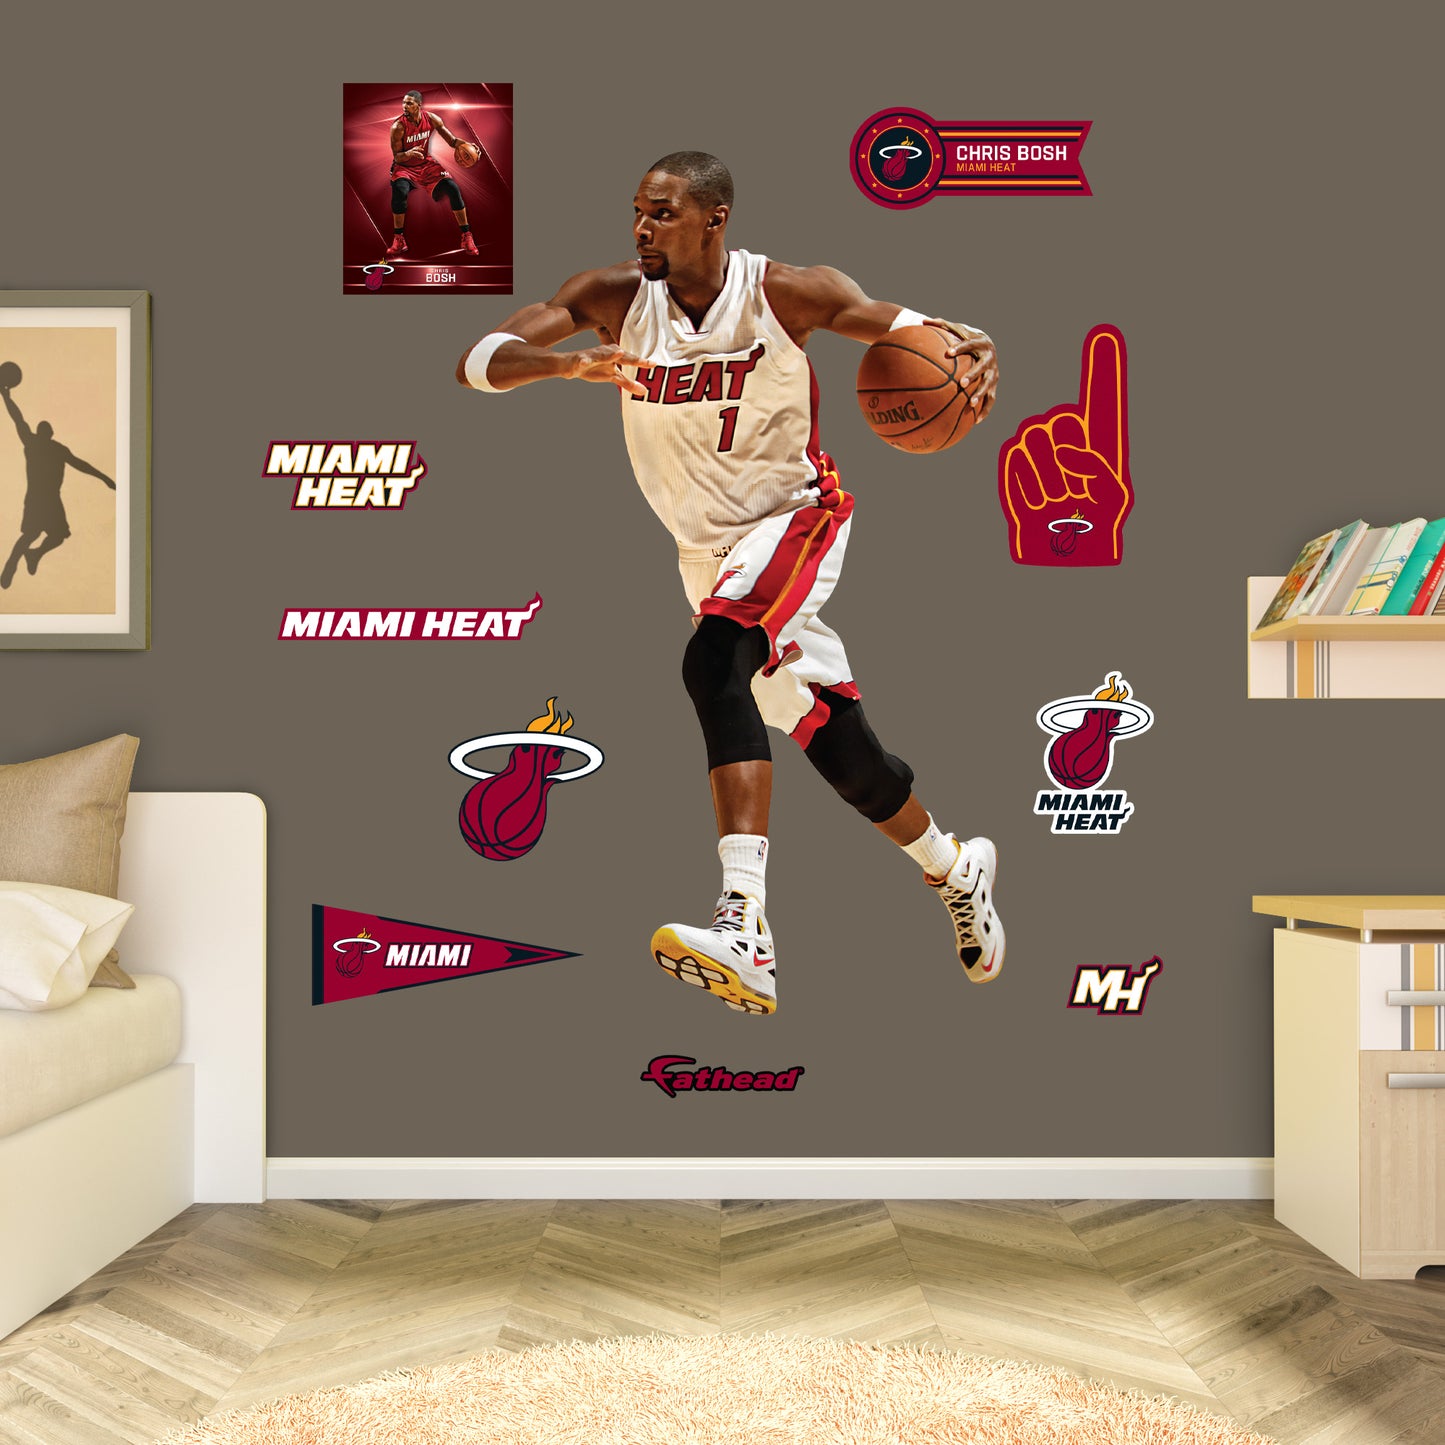 Miami Heat: Chris Bosh Legend        - Officially Licensed NBA Removable     Adhesive Decal